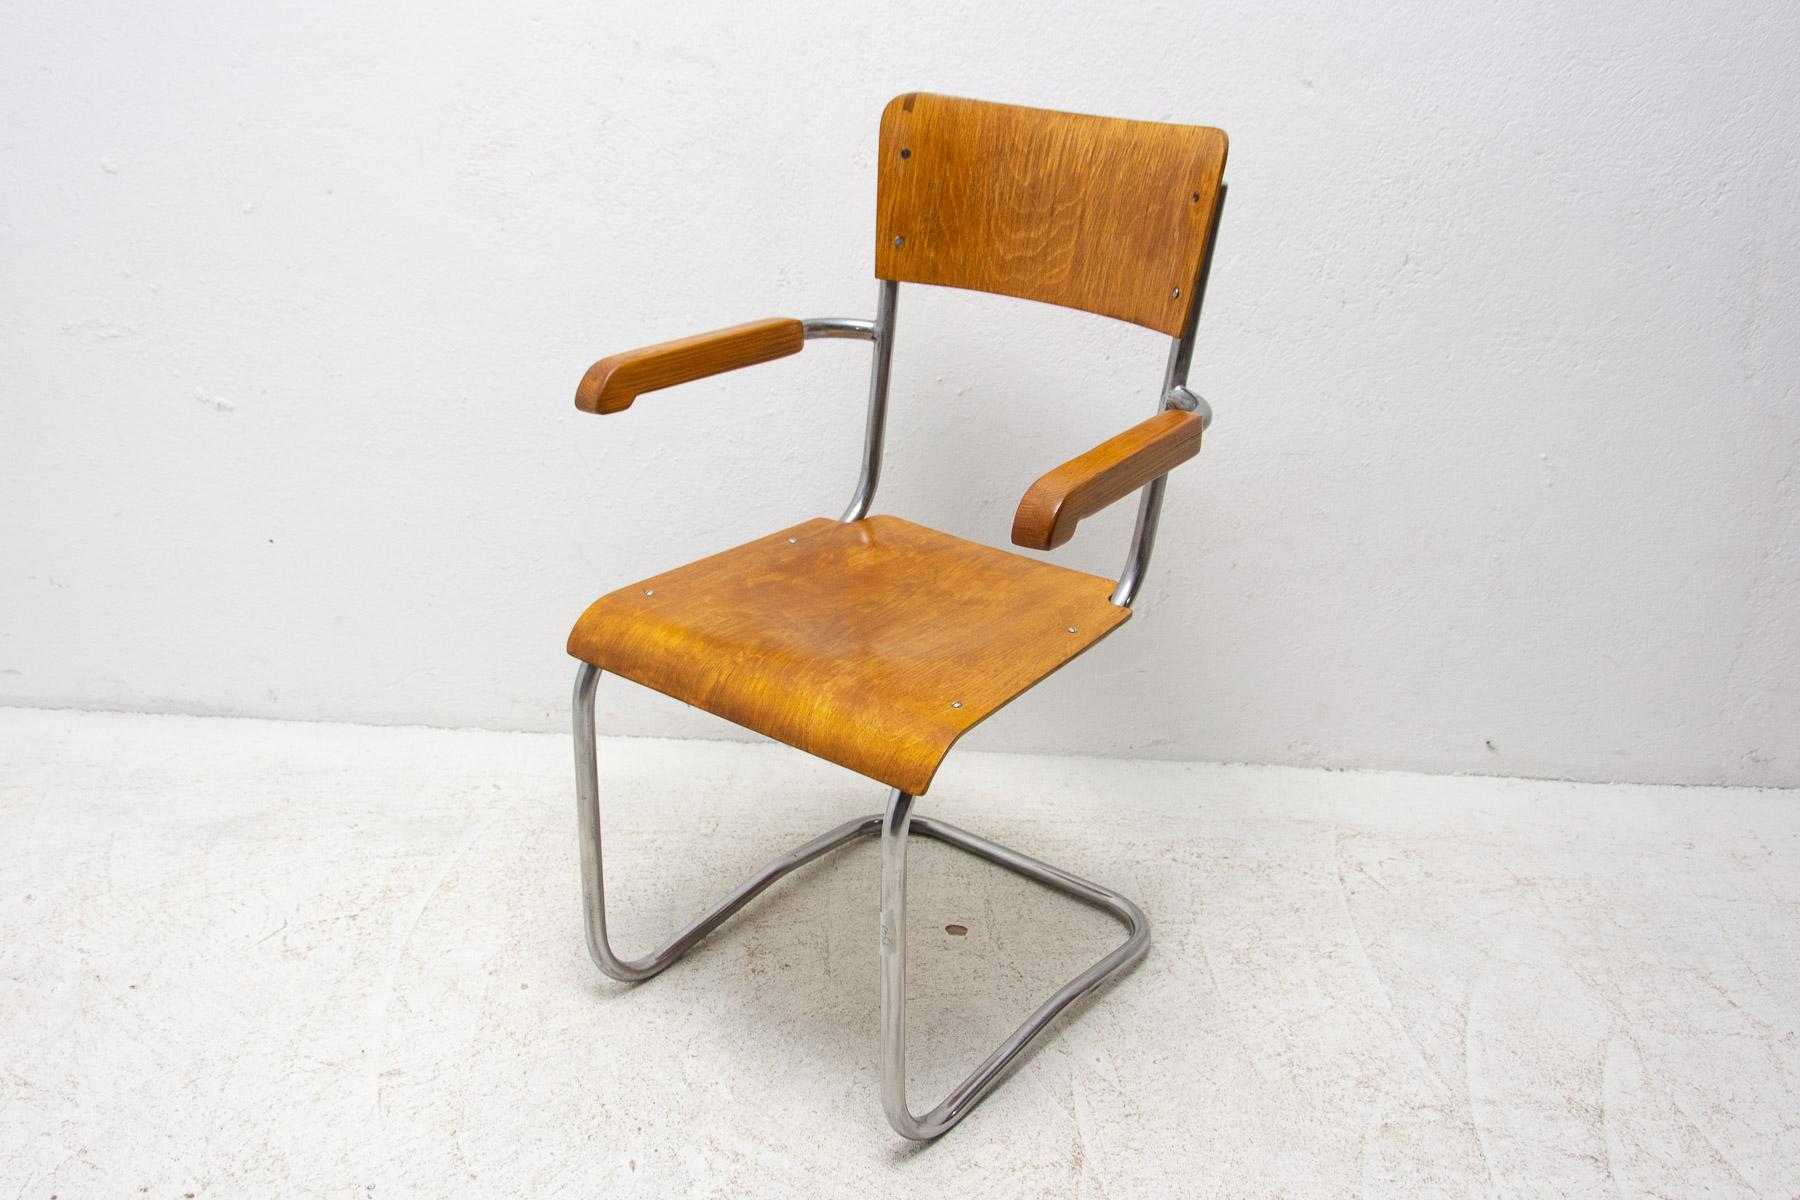 This B43 tubular desk chair was designed in 1931 by the world-renowned designer Mart Stam. It was made in the 1950s by Kovona company. The chair is fully refurbished to a high gloss using polyurethane. In excellent condition.

Measures: Height: 88